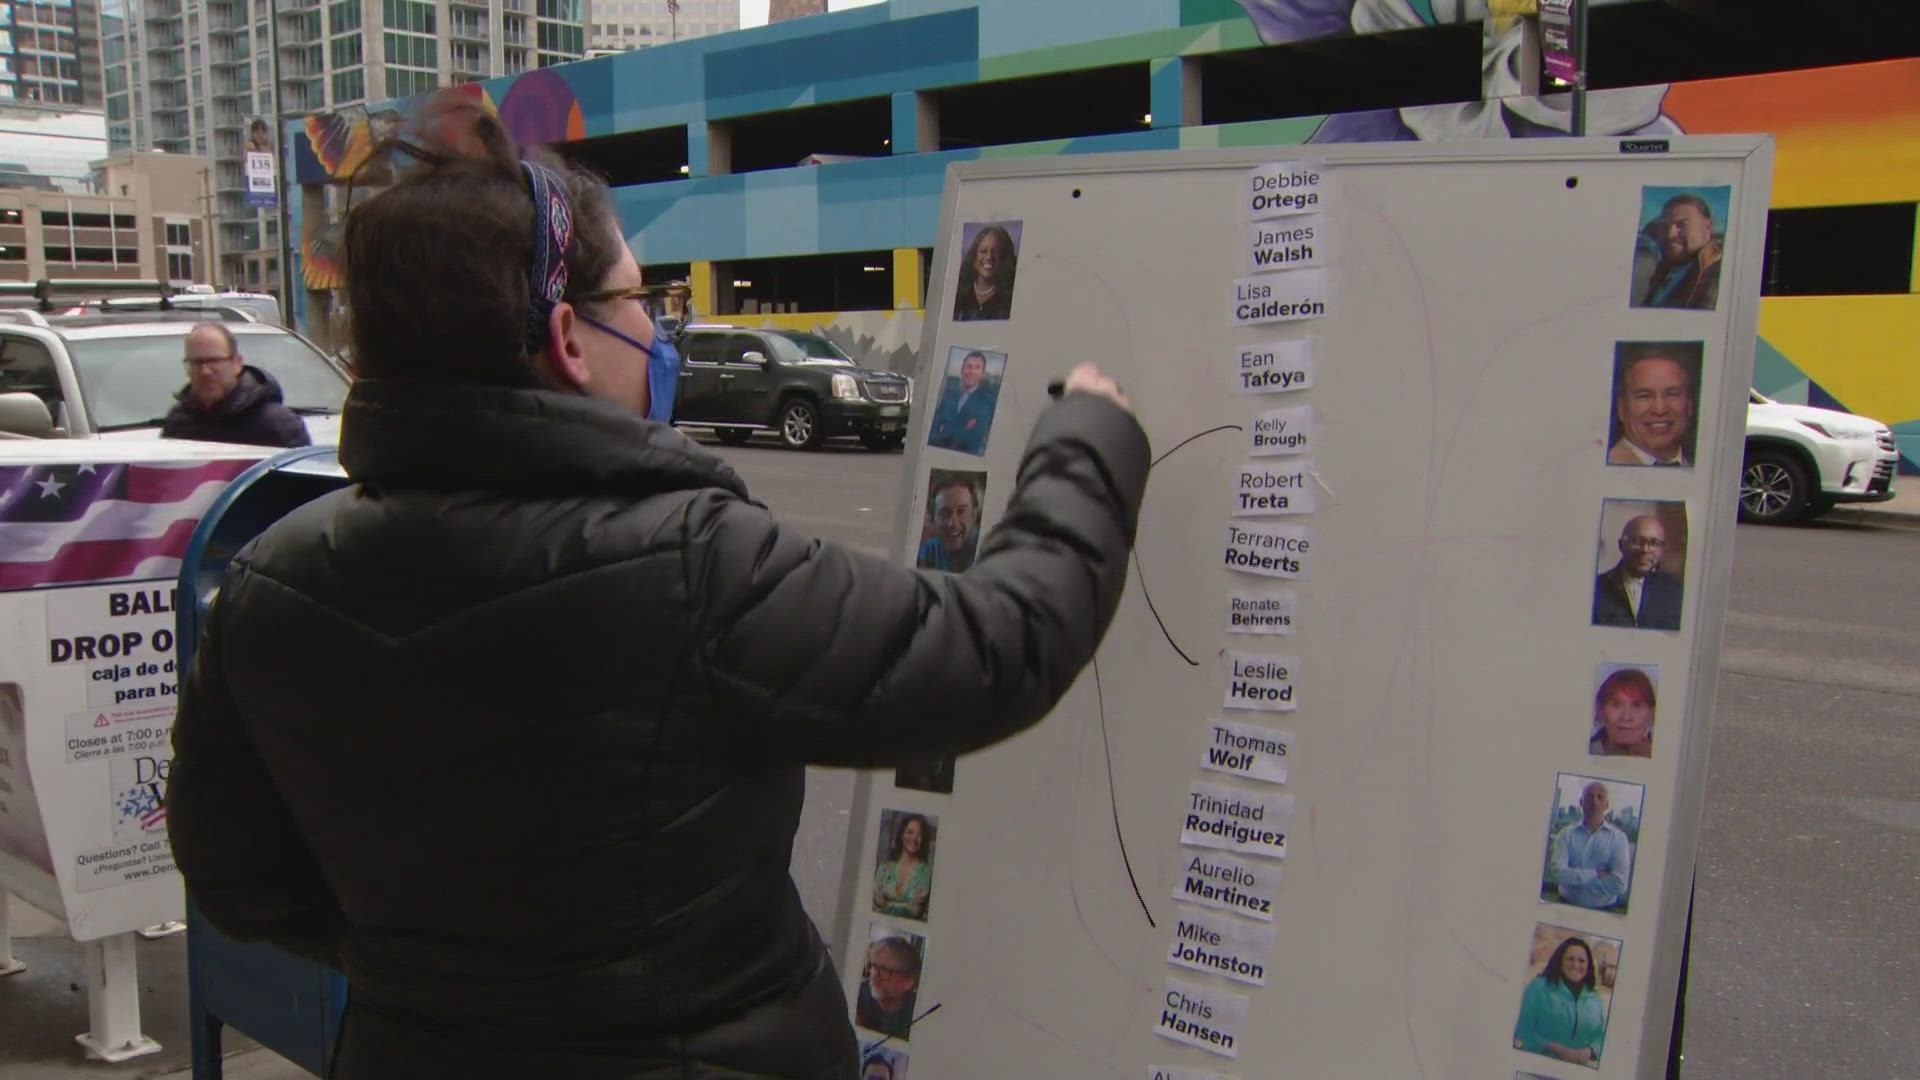 9NEWS asked some Denver voters to play "Guess Who?" with mayoral candidates. Here's how many names and faces they recognized.